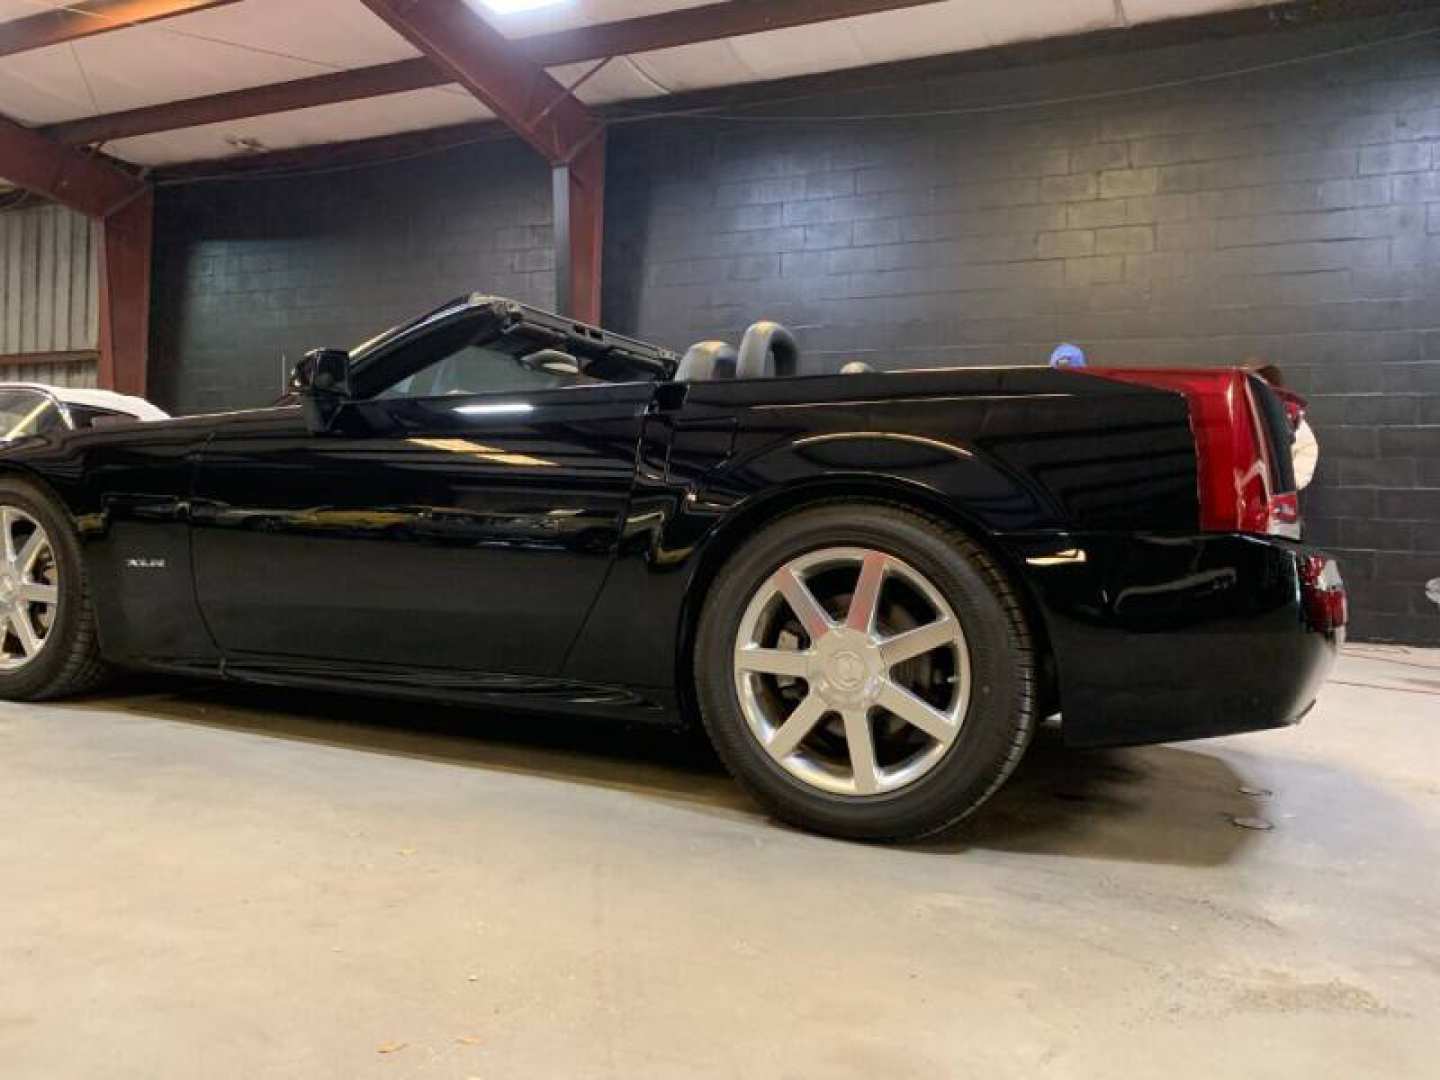 4th Image of a 2004 CADILLAC XLR ROADSTER